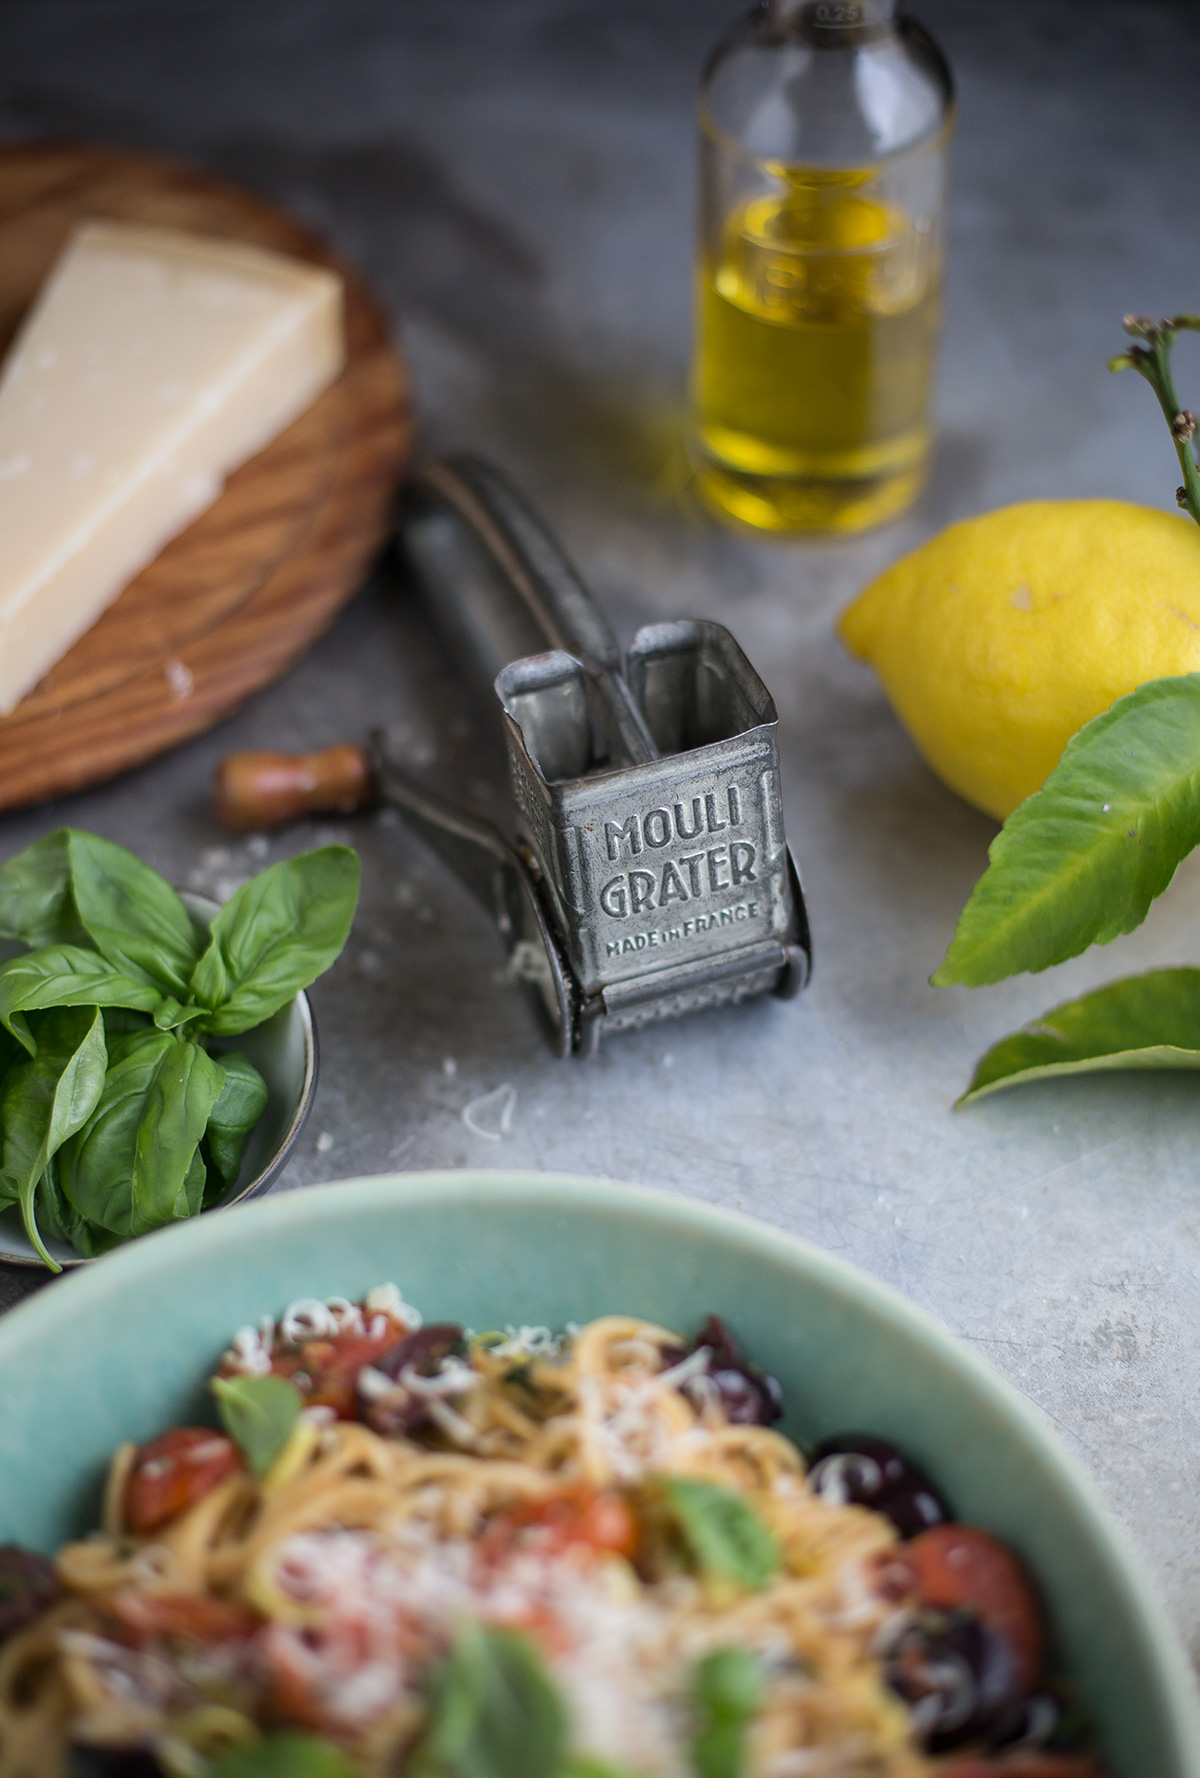 A recipe for a delicious summer pasta with tomato, olives, anchovy, basil & lemon